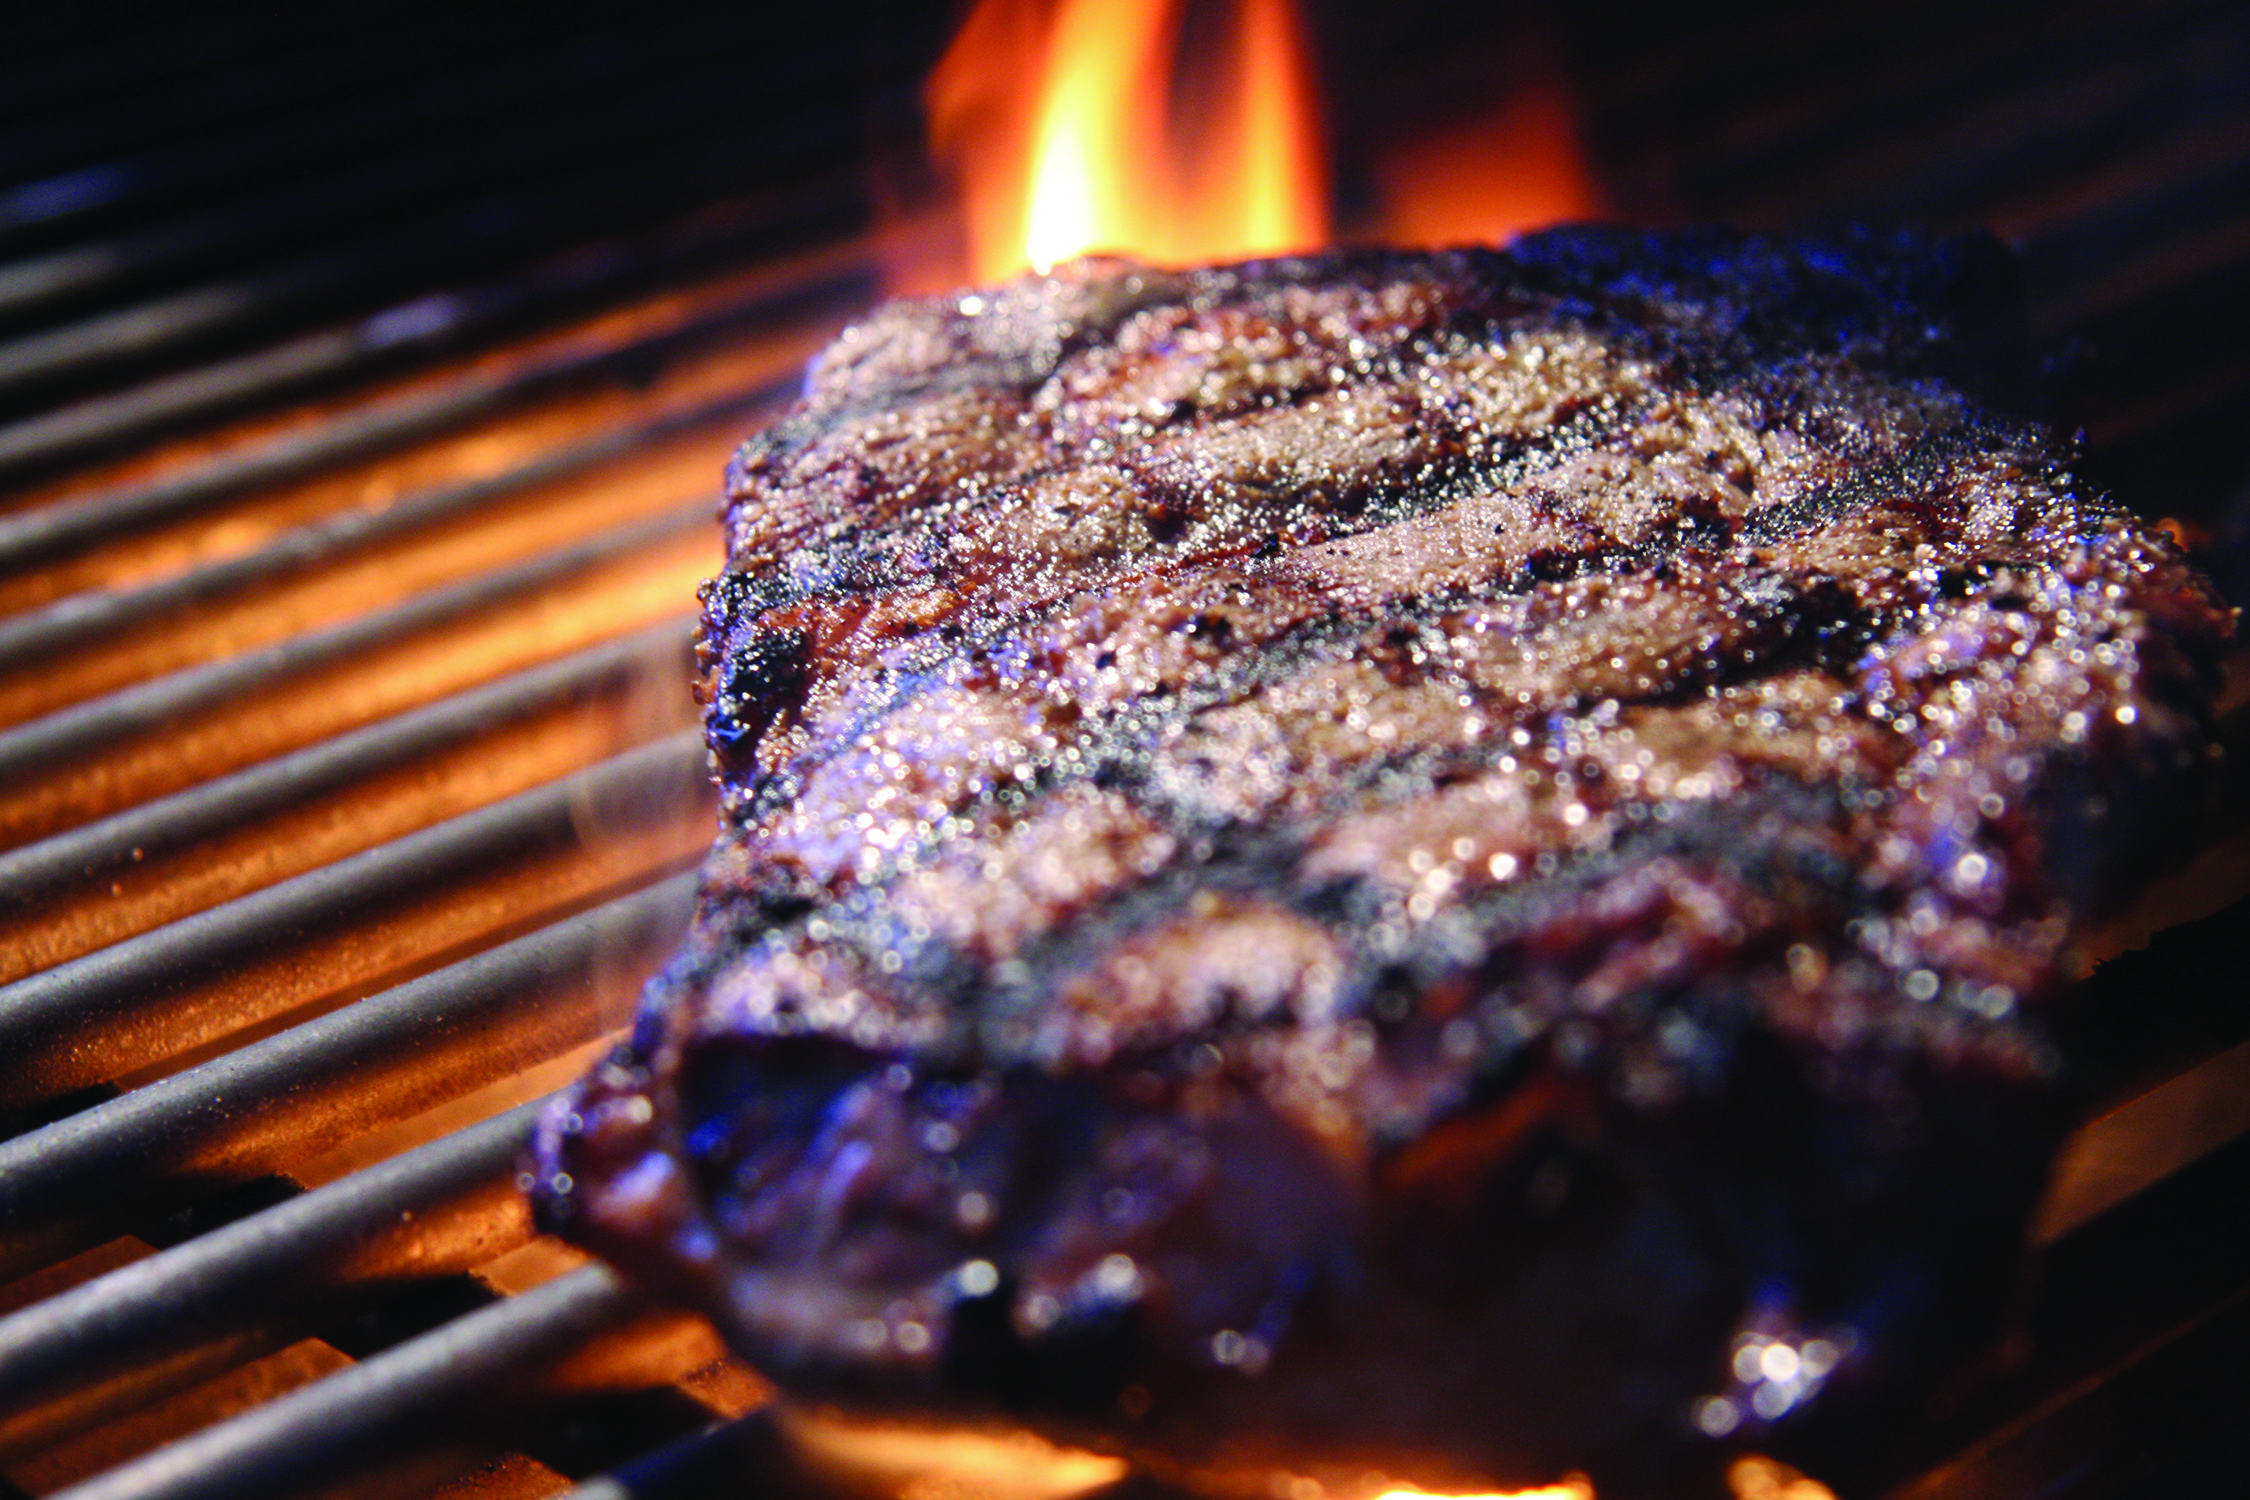 Steak on a grill (Photo courtesy of Getty Images)